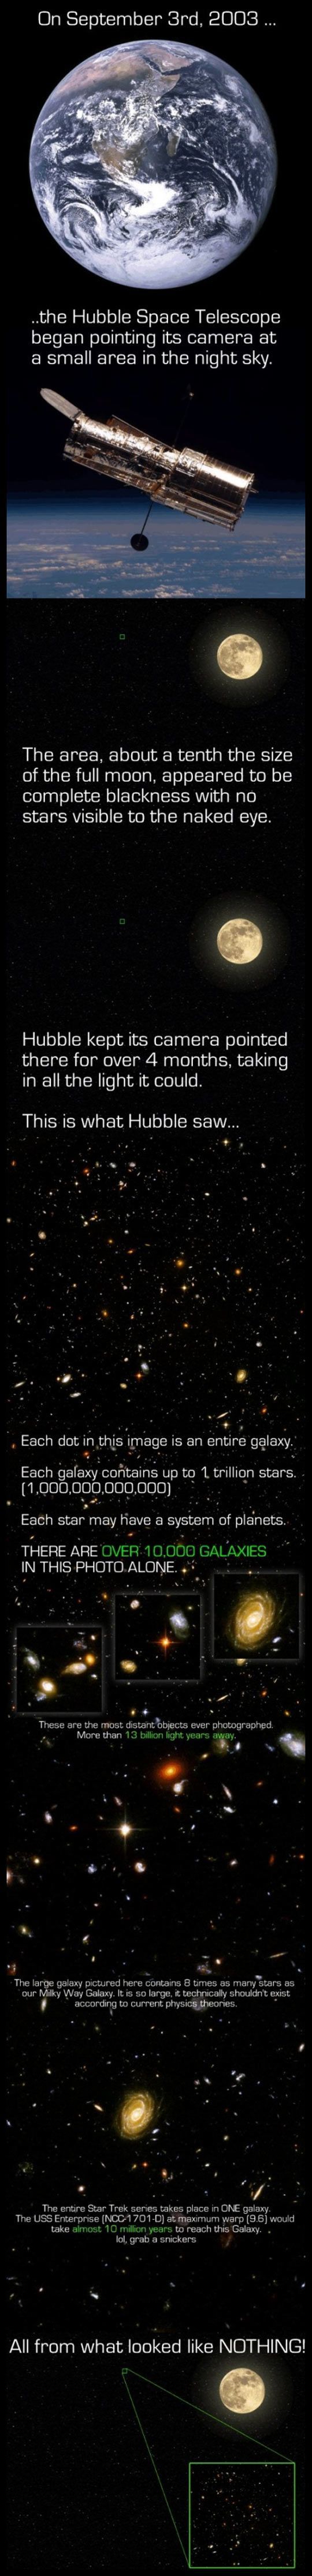 Some feel that it is egotistical & ignorant to believe we are alone in the universe. Most agree that it is difficult for us to